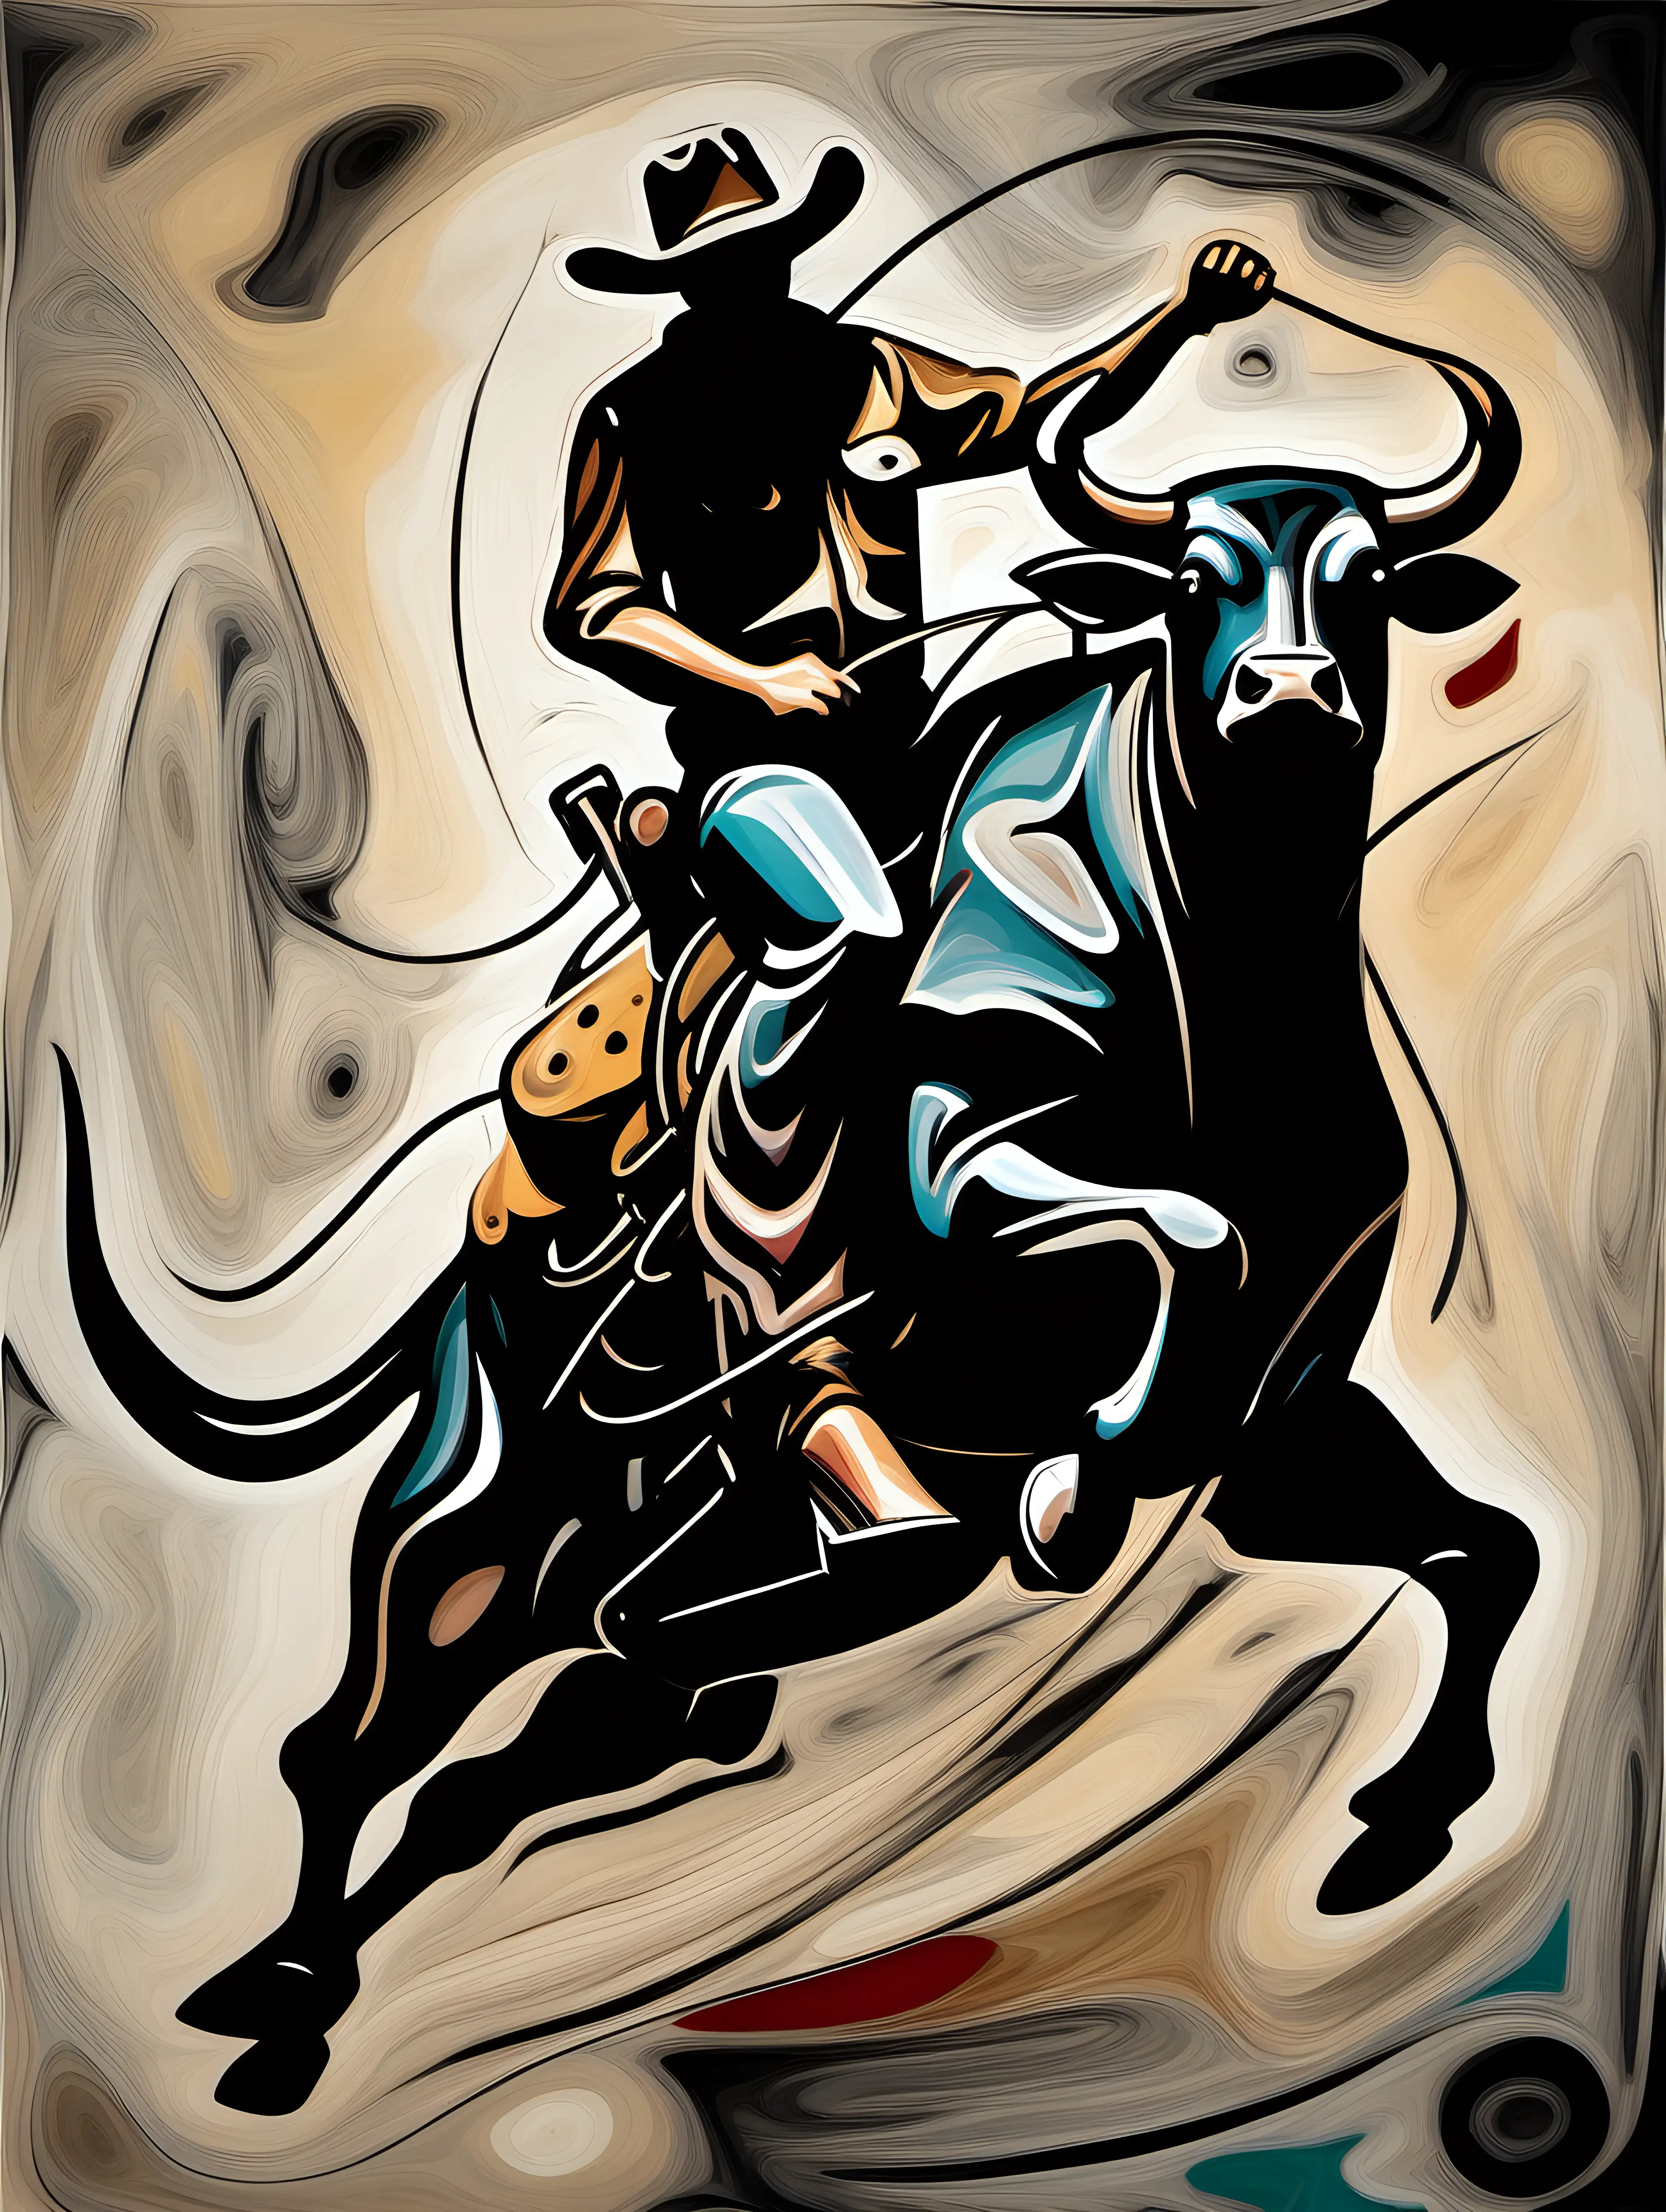 Bold Cowboy Bull Riding in Abstract Expressionist Art